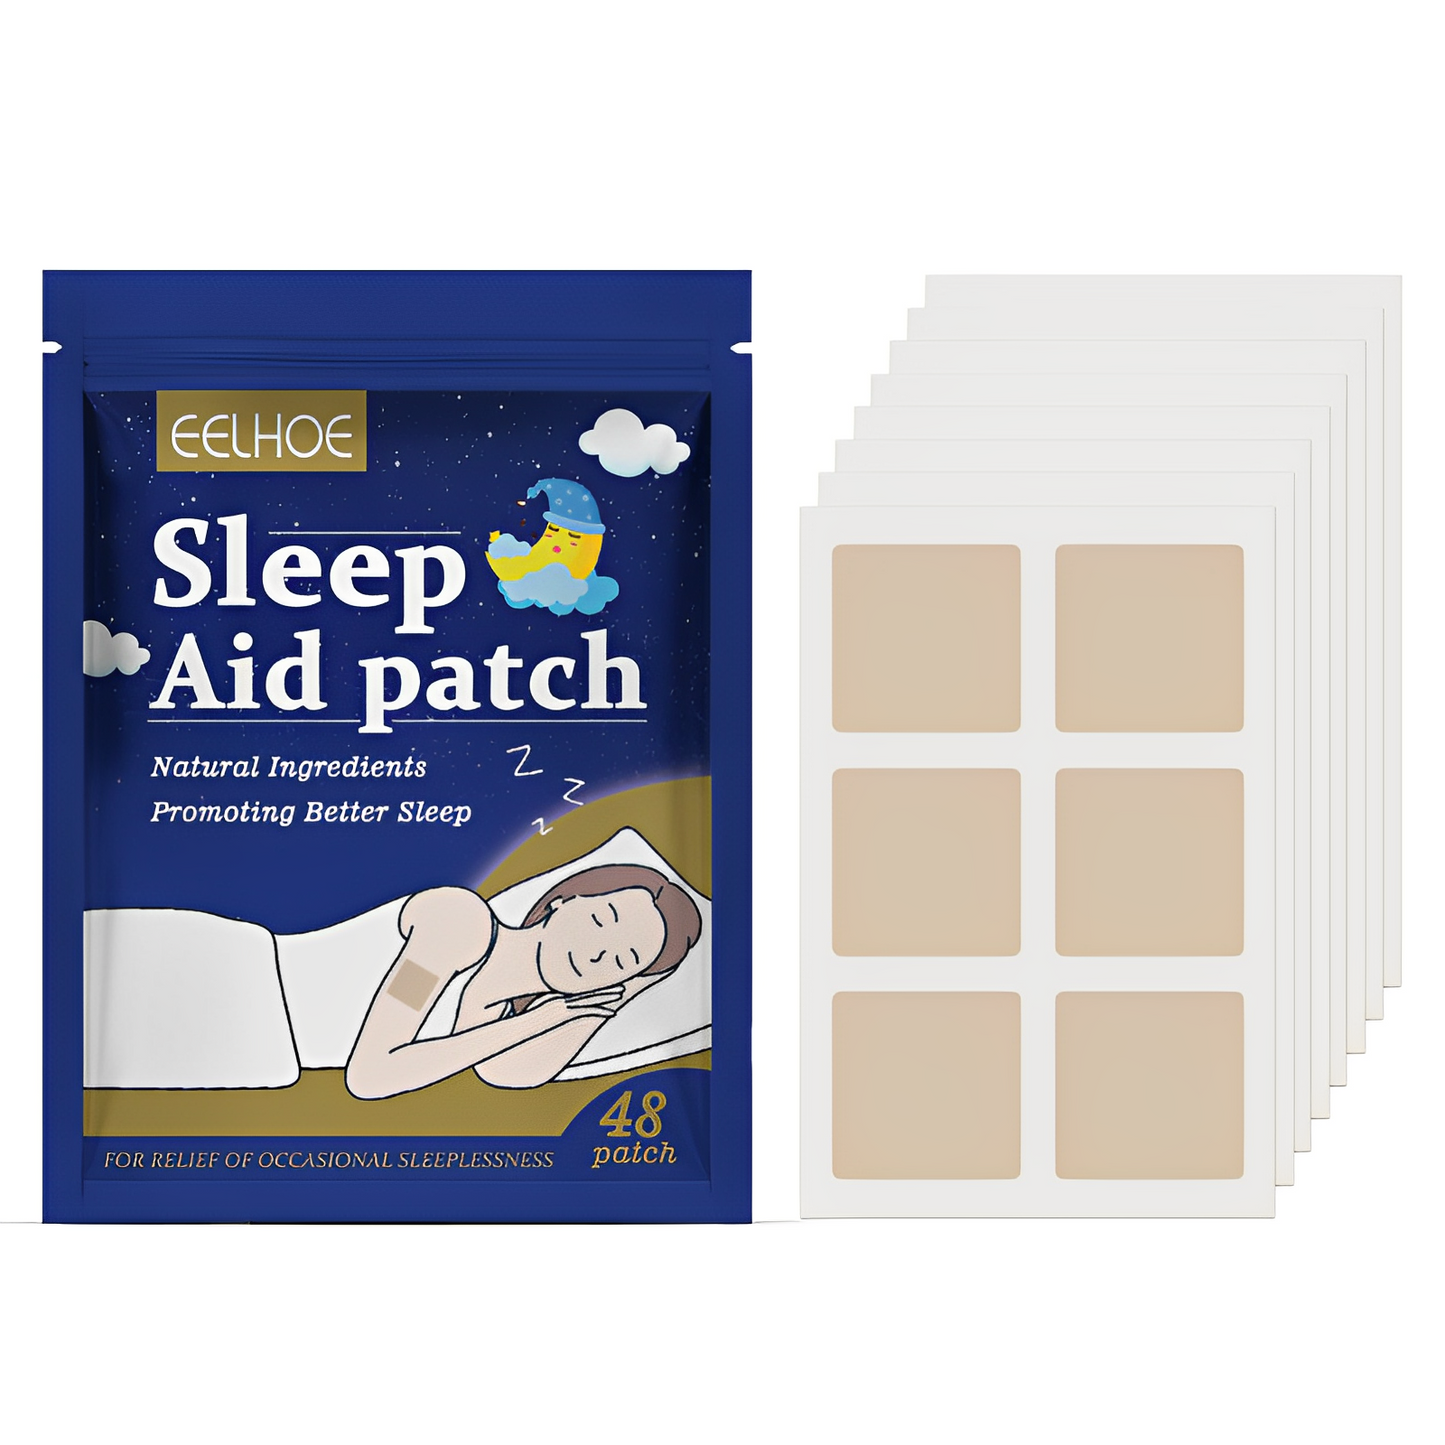 NightRust for a deep and restful sleep